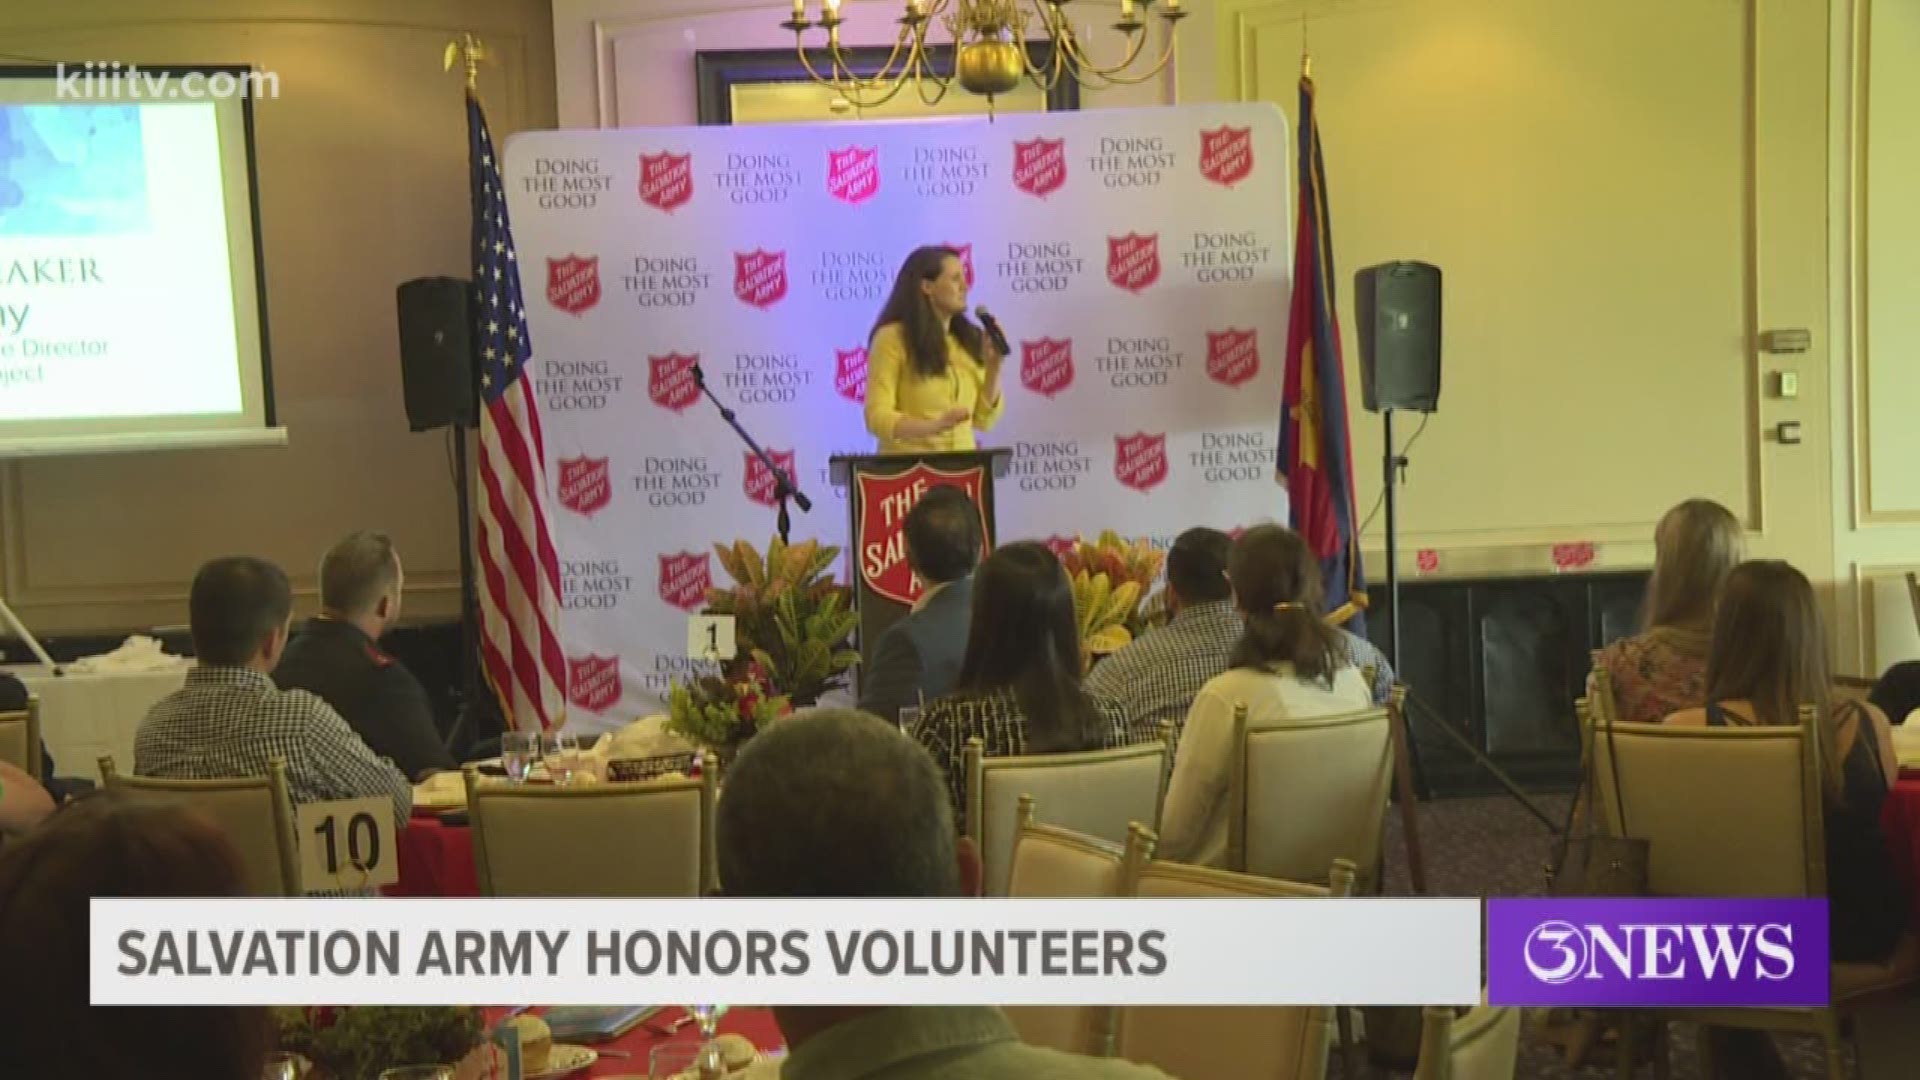 The Salvation Army of the Coastal Bend held their first ever "Shield of Hope" event Tuesday afternoon with the purpose of presenting awards to their volunteers.